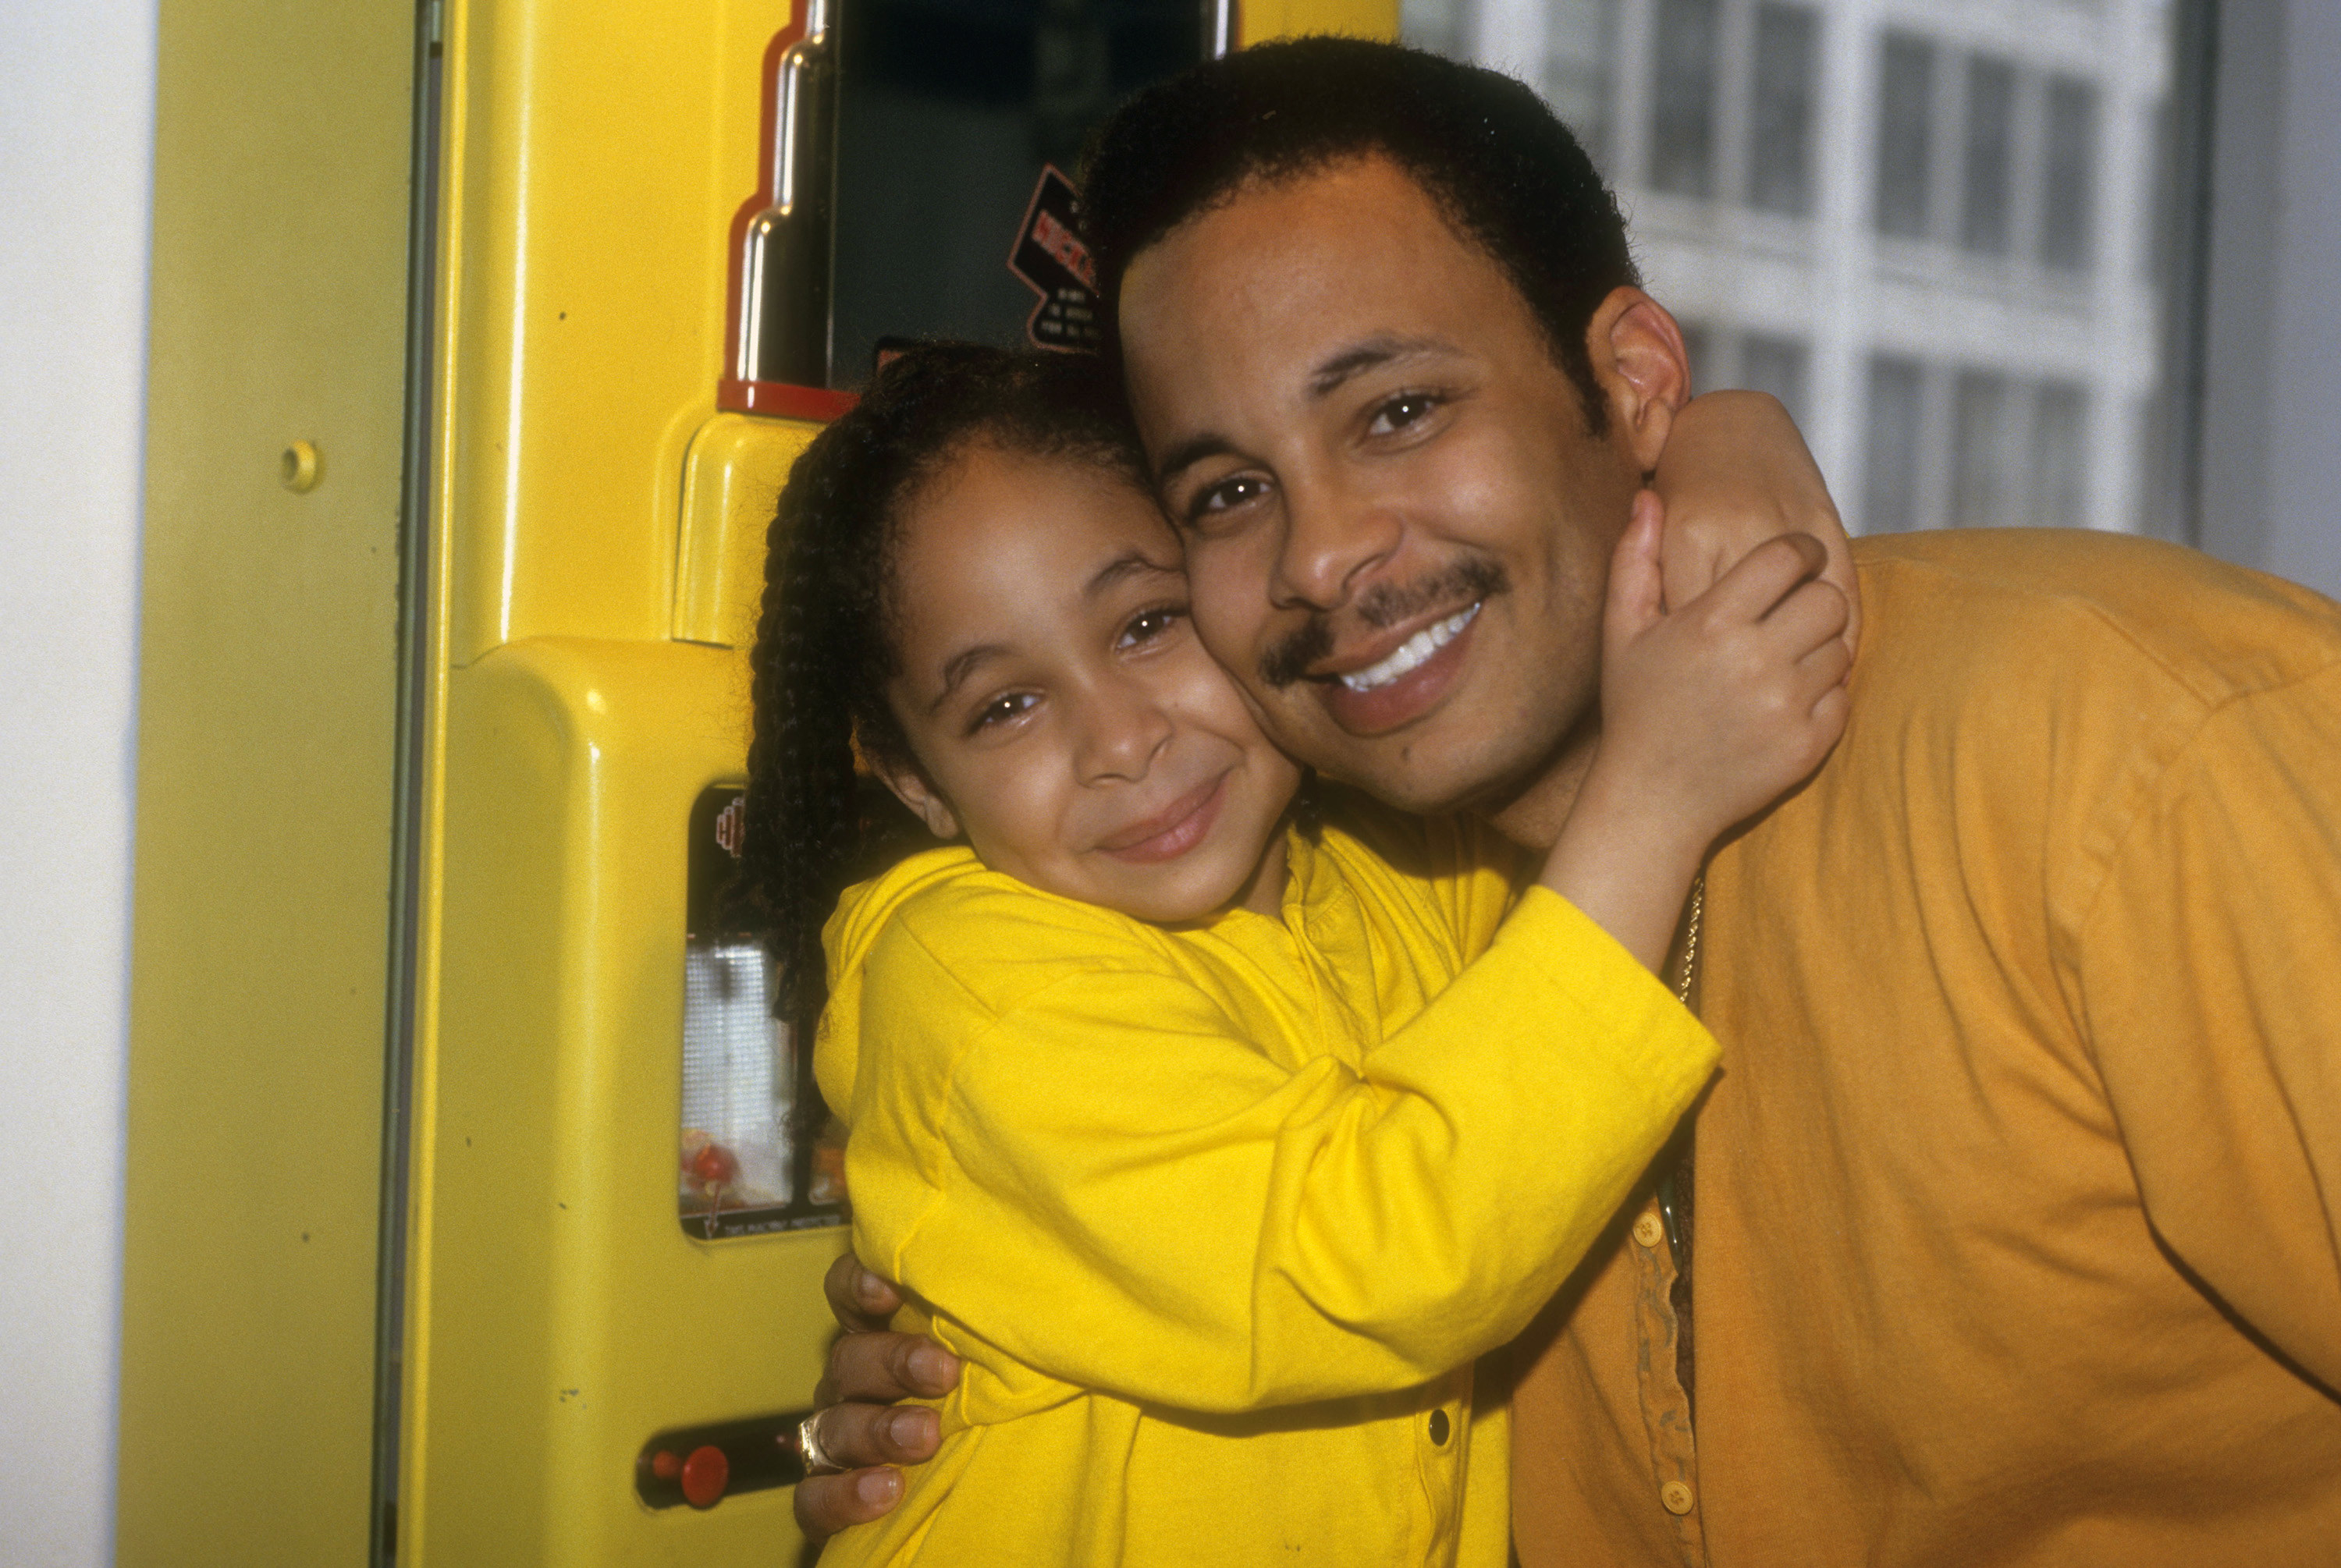 Seven-year-old Raven-Symoné gives her father a hug